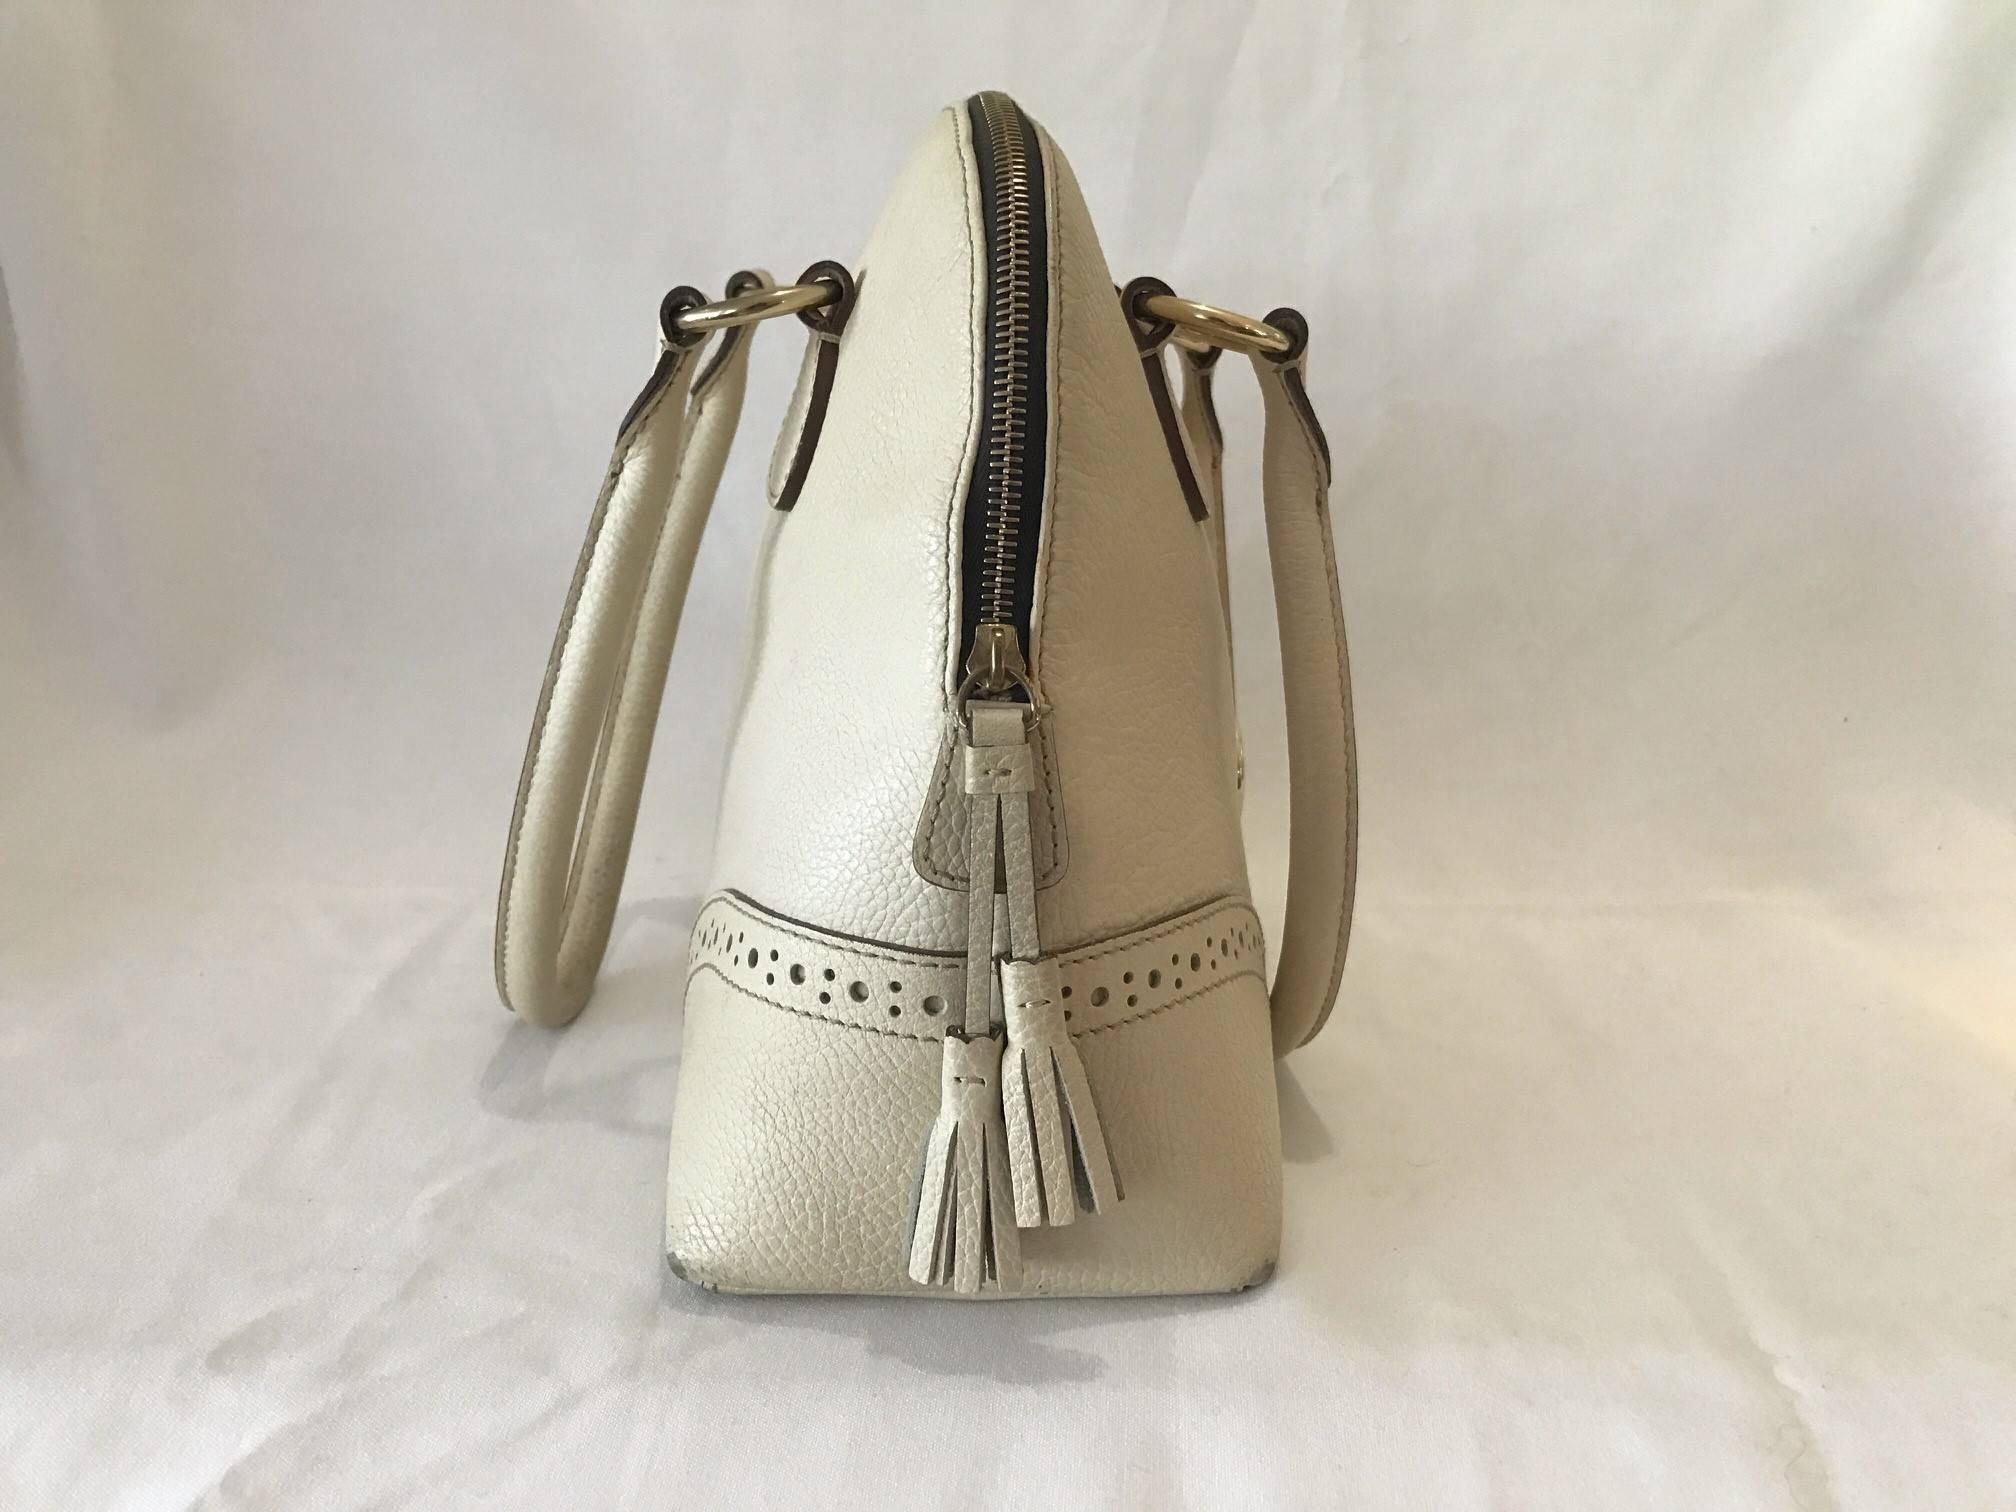 American Authentic Creme Colored Dooney Bourke Leather Hand Bag, Clean, Rarely Used For Sale